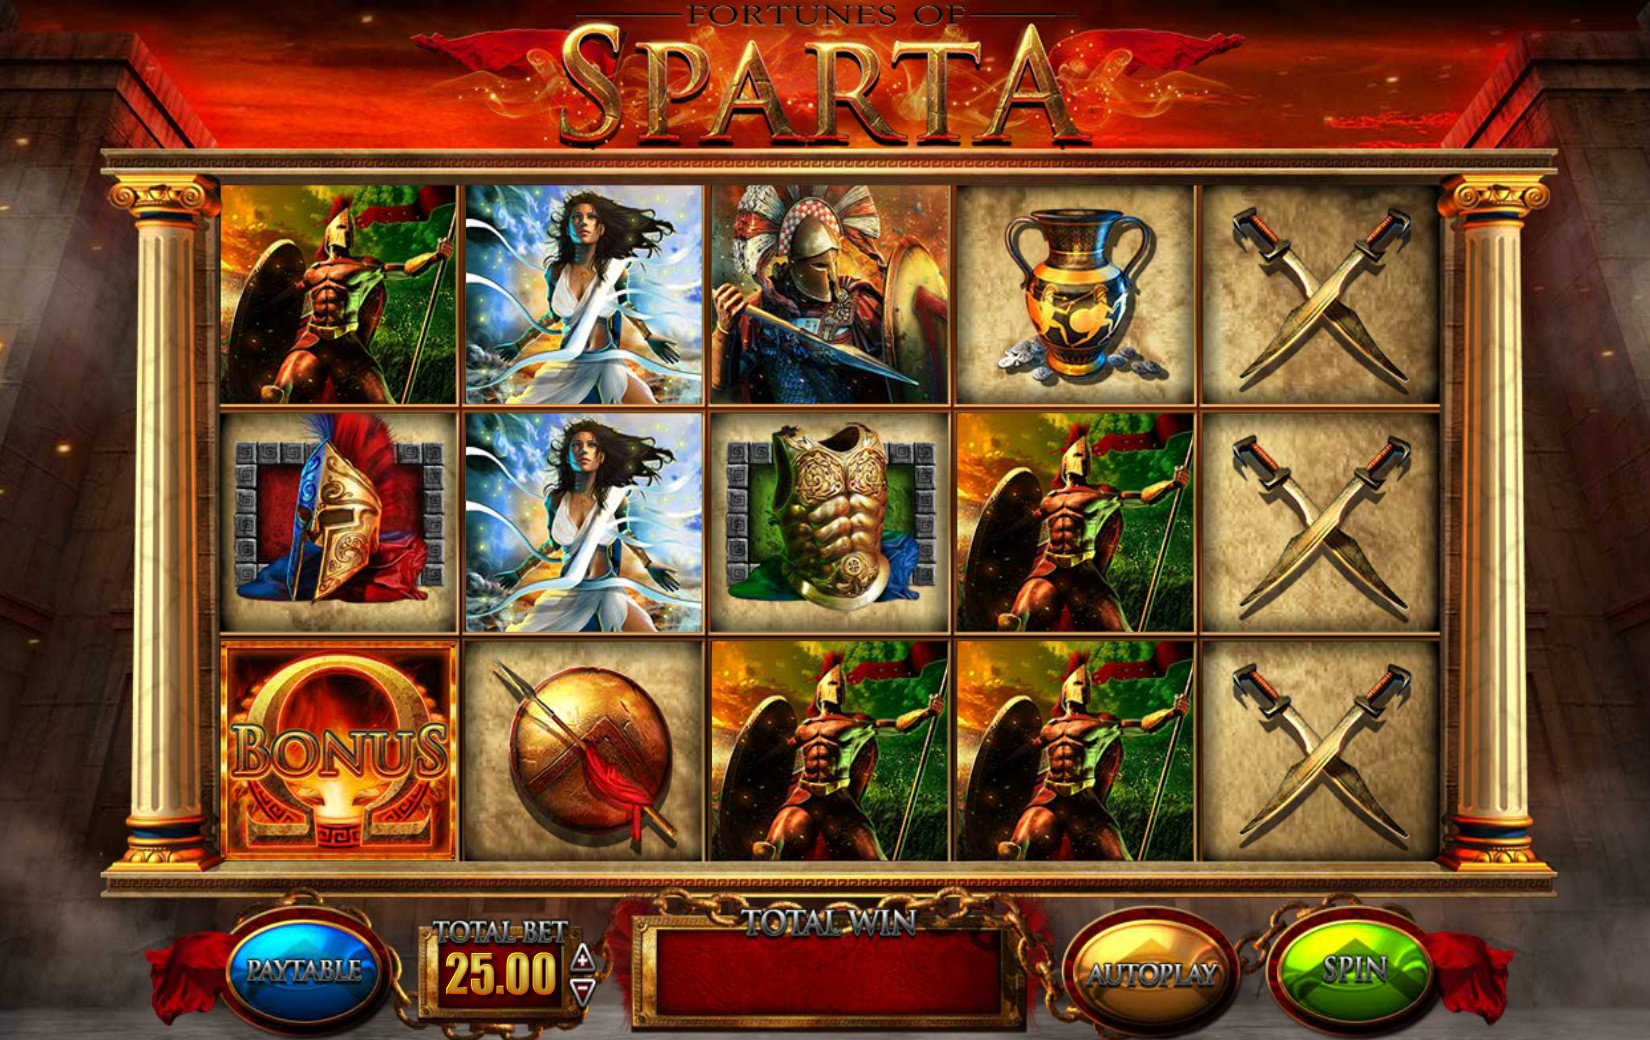 Fortunes of Sparta (Fortunes of Sparta) from category Slots